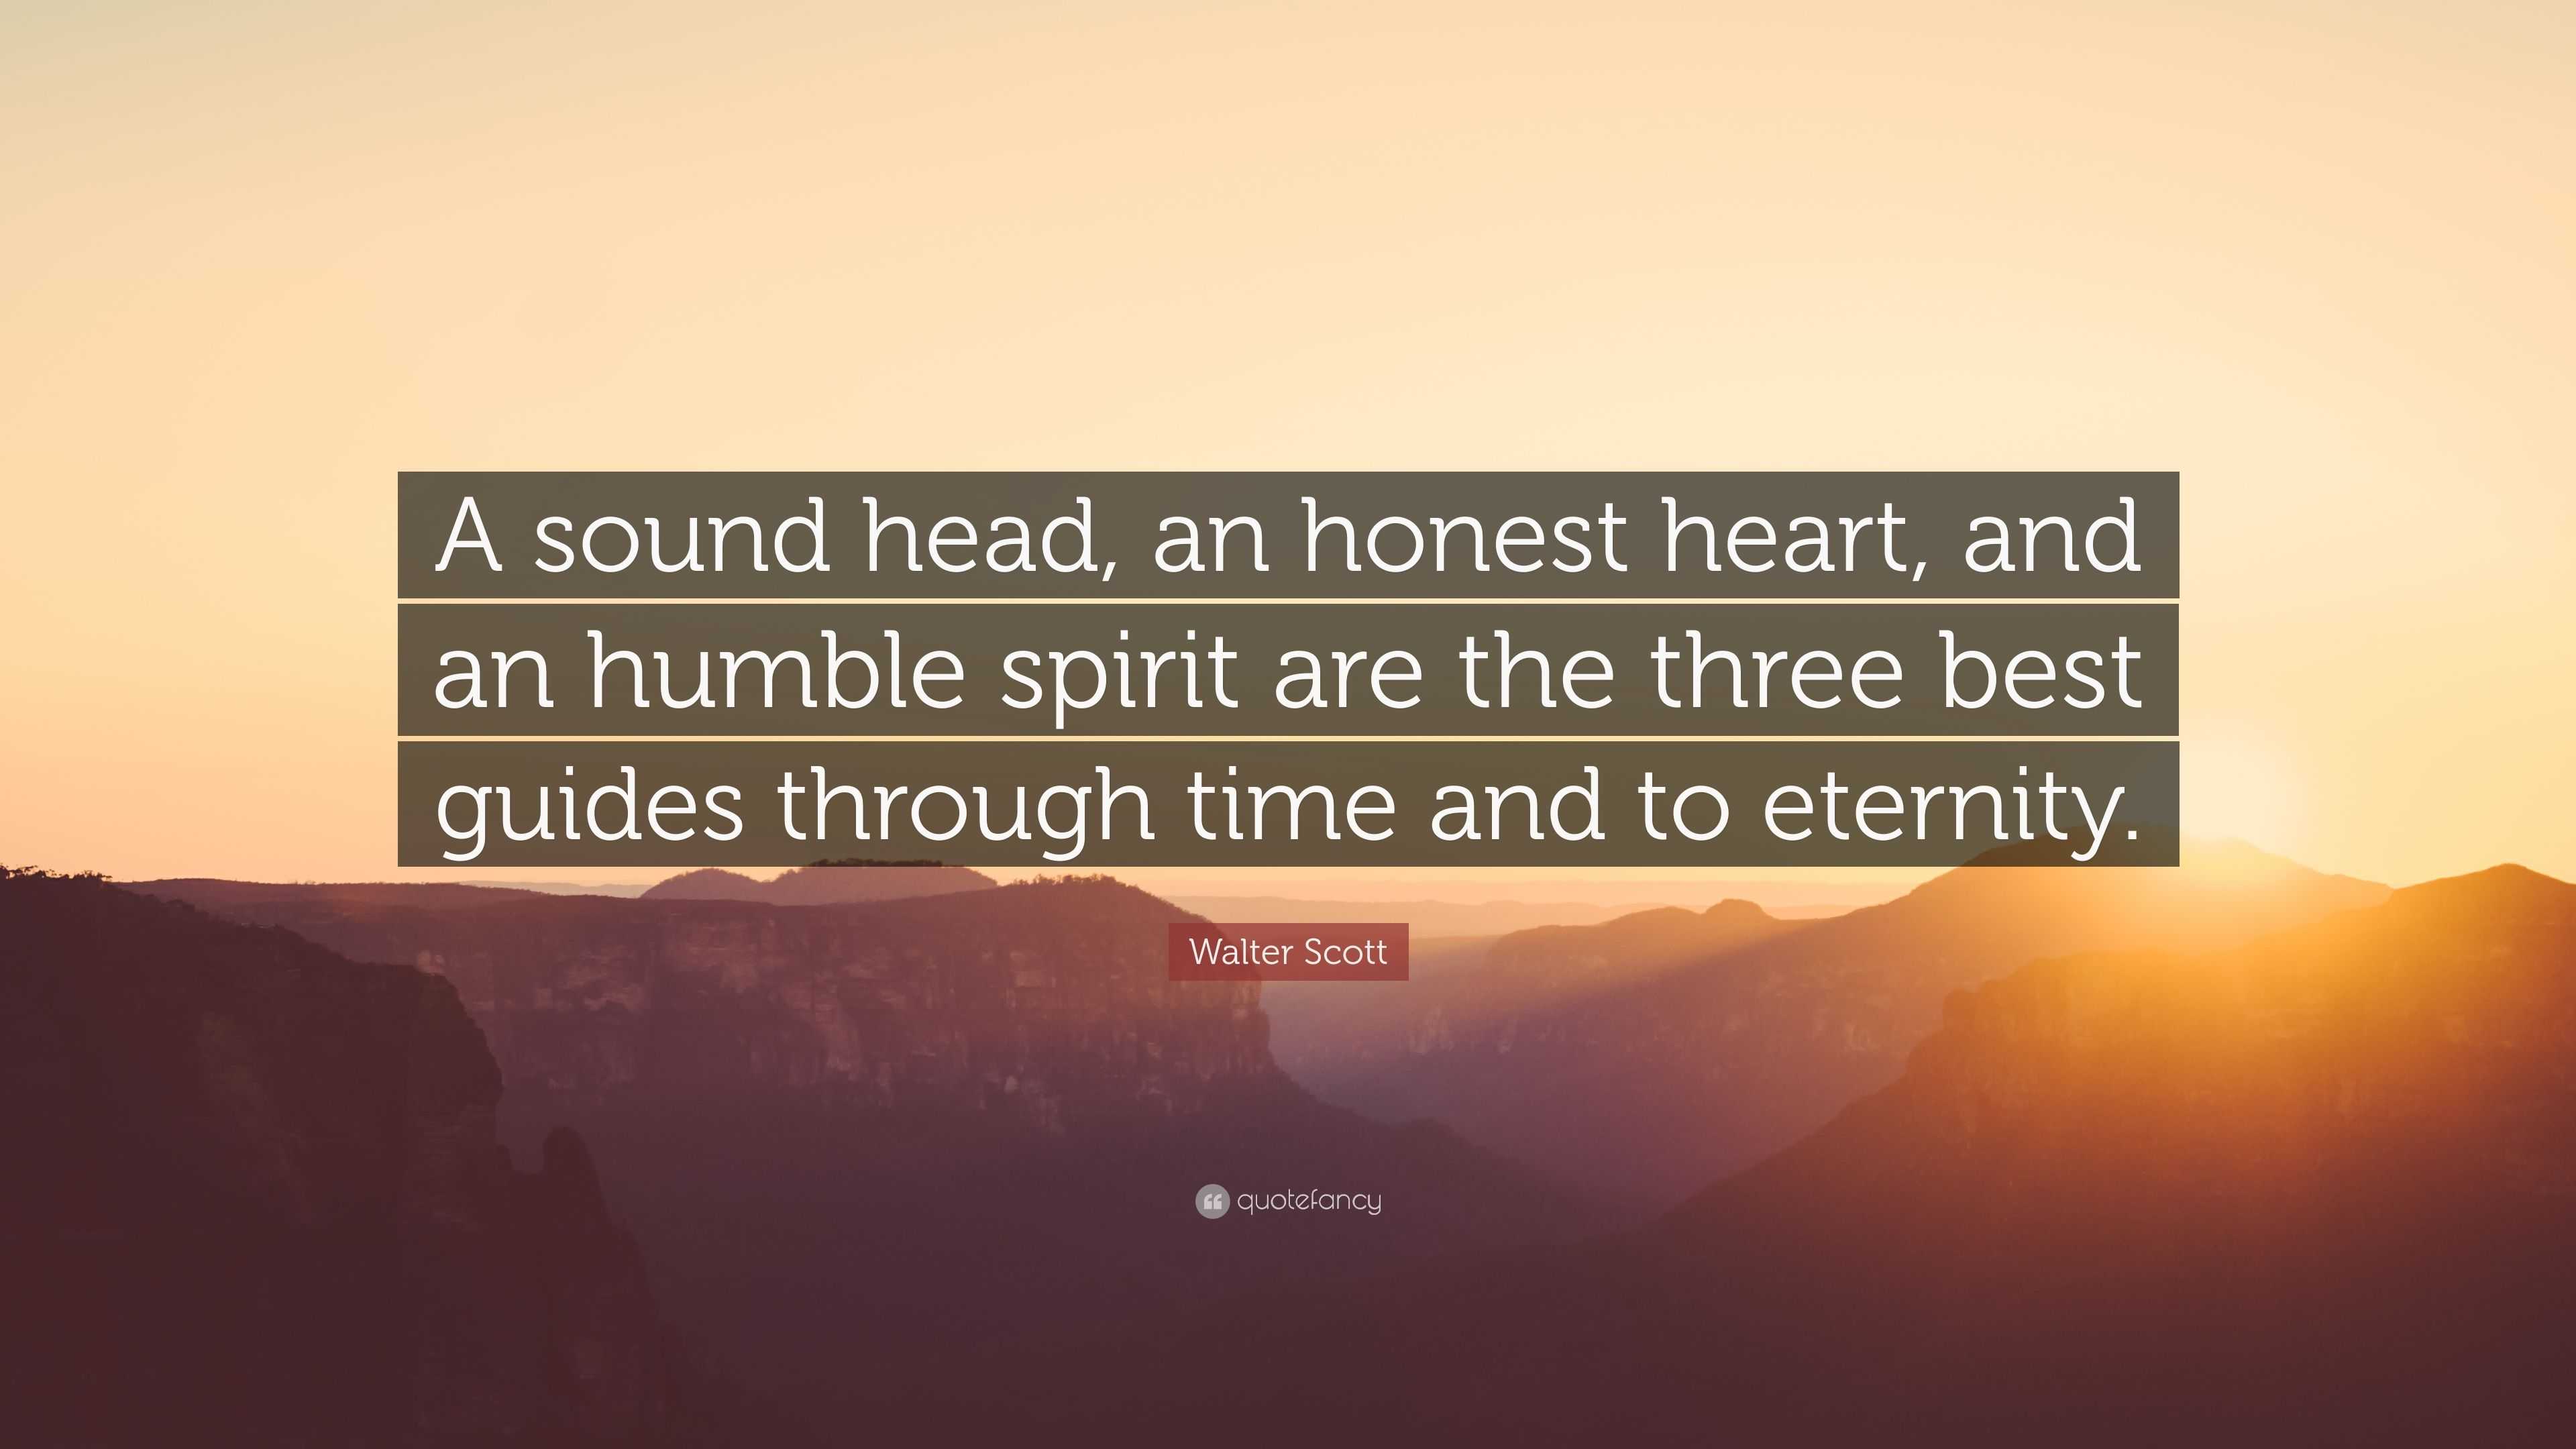 Walter Scott Quote: “A sound head, an honest heart, and an humble ...